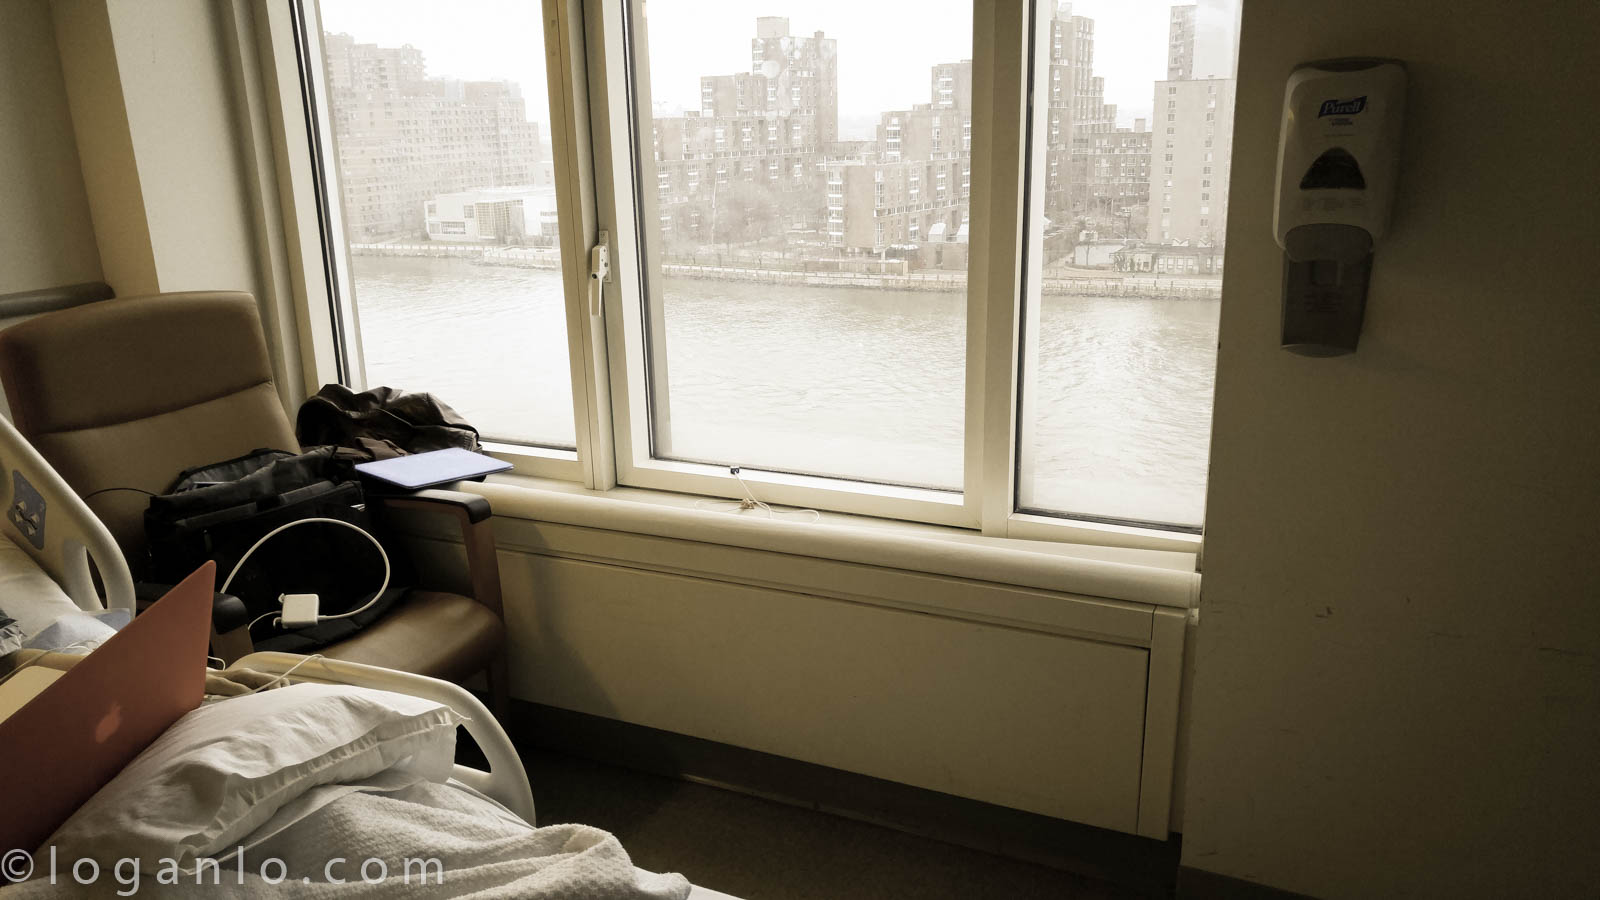 A hospital room looking at the East River